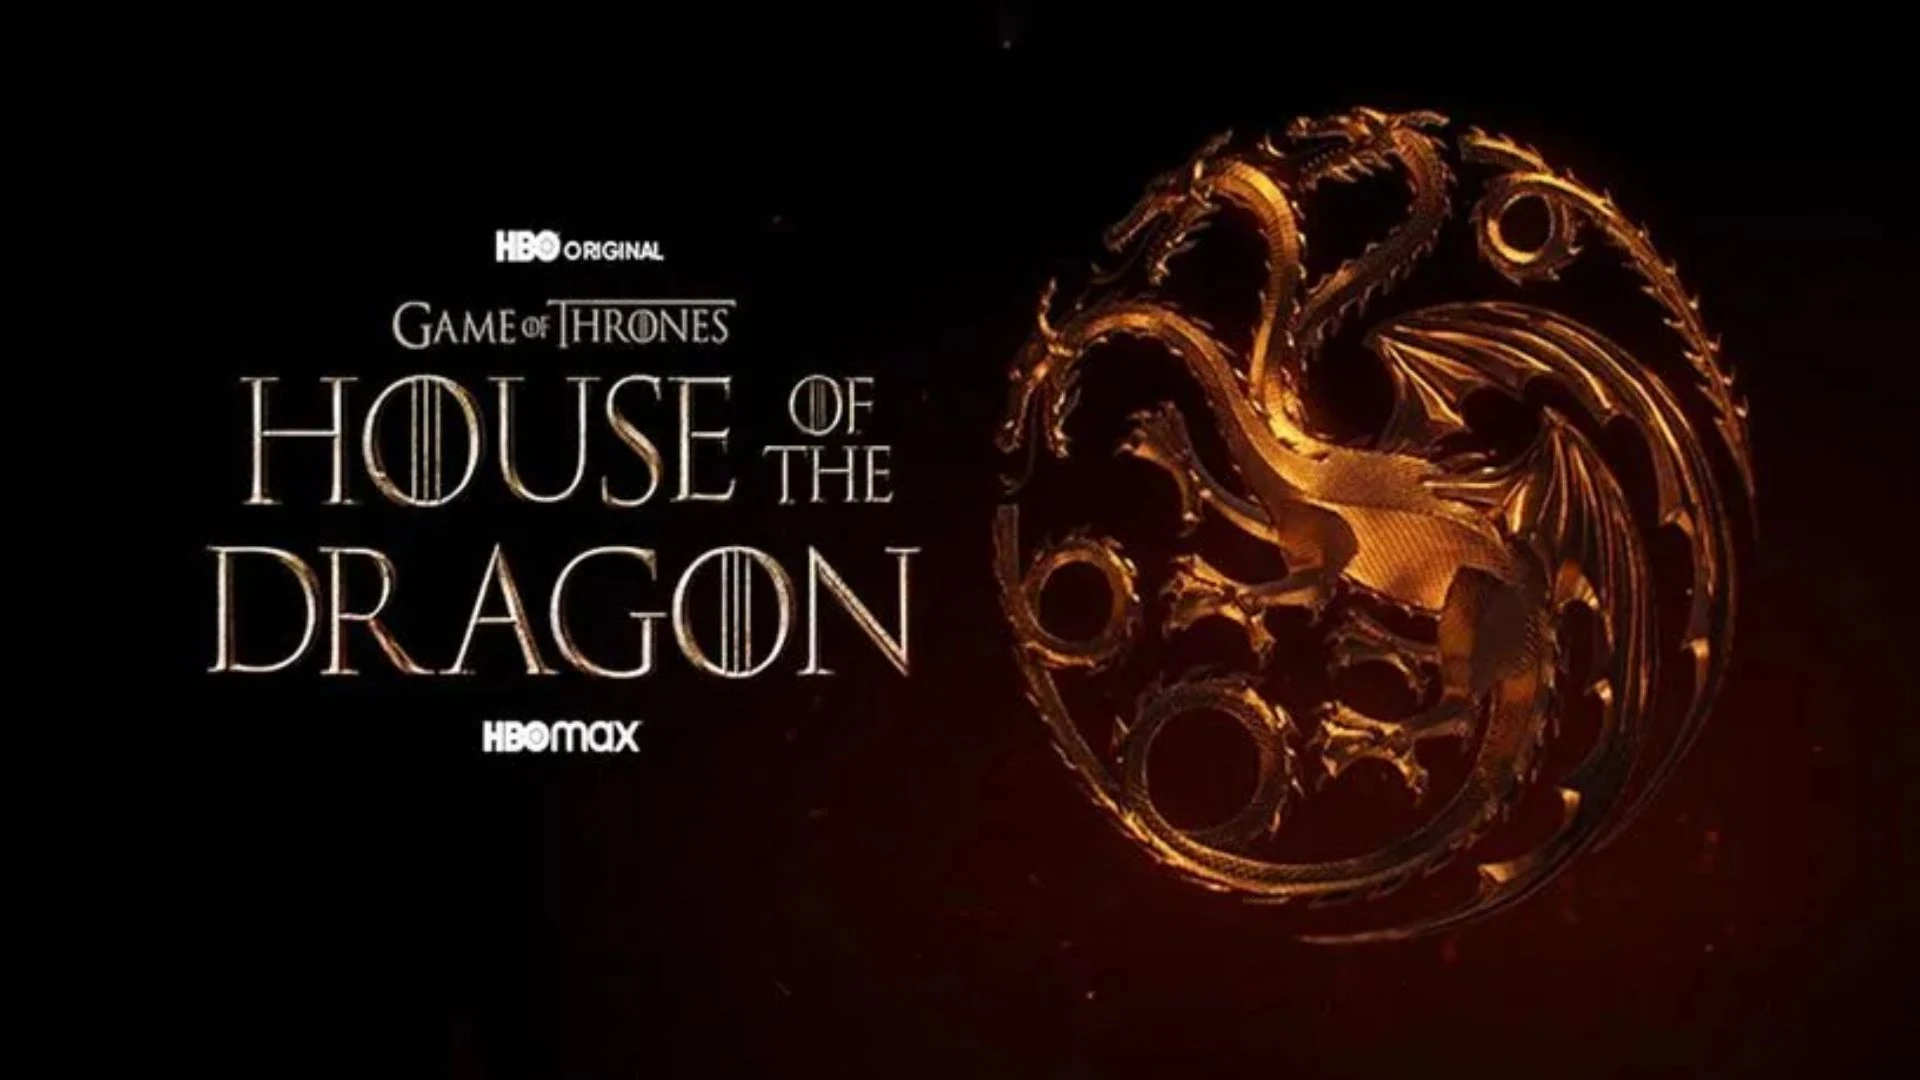 HBO House of the Dragon earned the launch on nearly $200 million